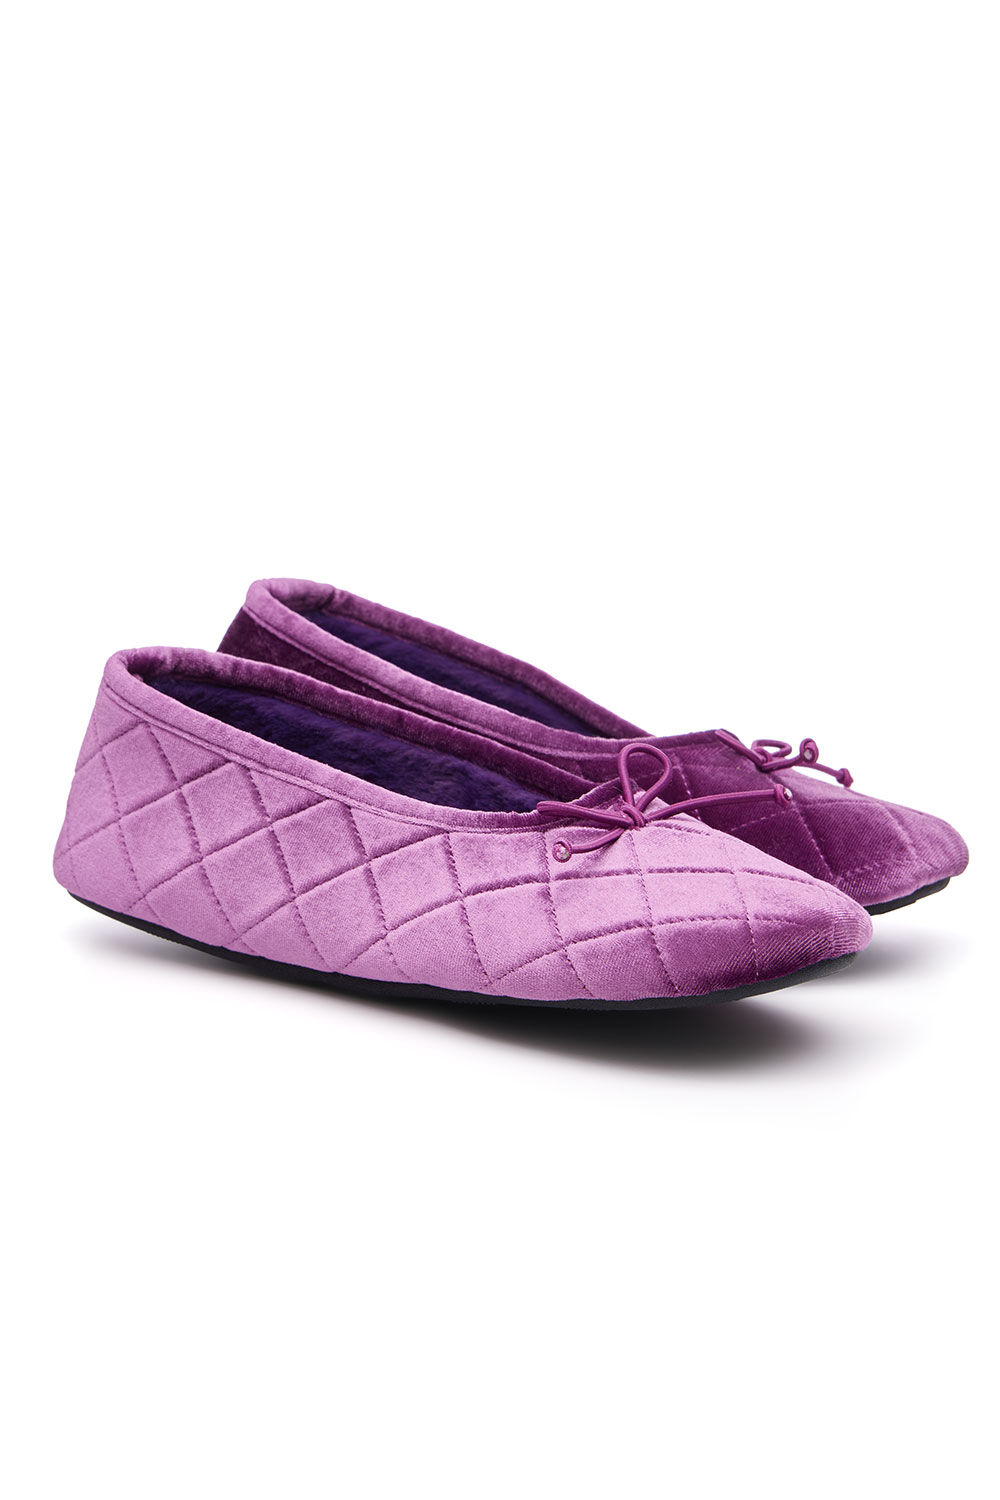 Bonmarche Magenta Velvet Faux Fur Lined Slippers With Bow Detail, Size: 6